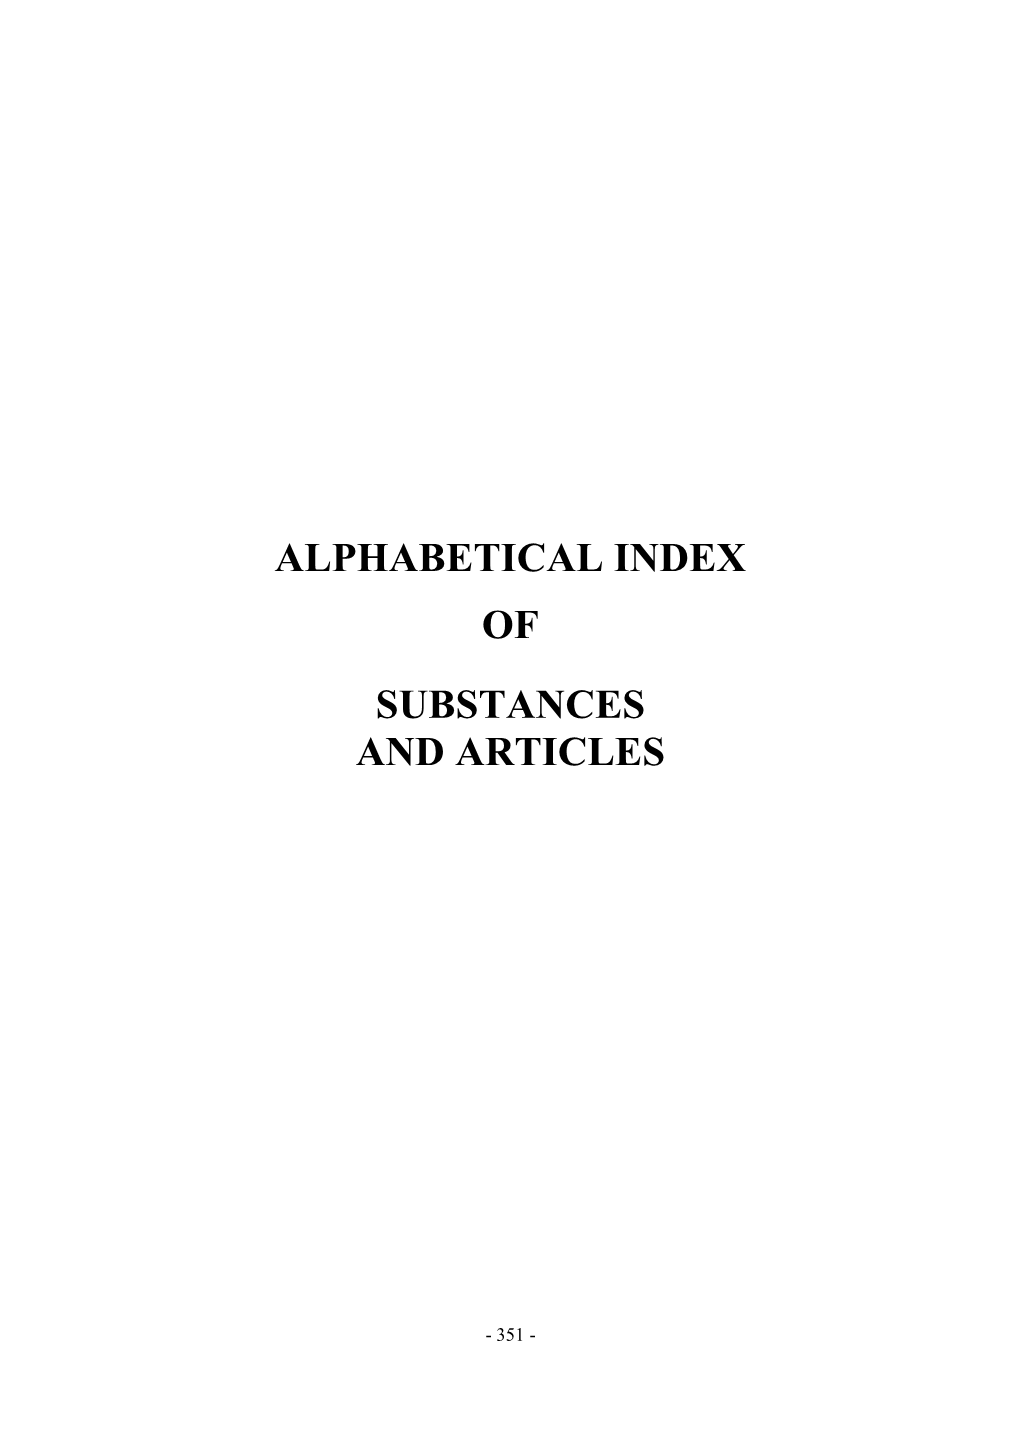 Alphabetical Index of Substances and Articles